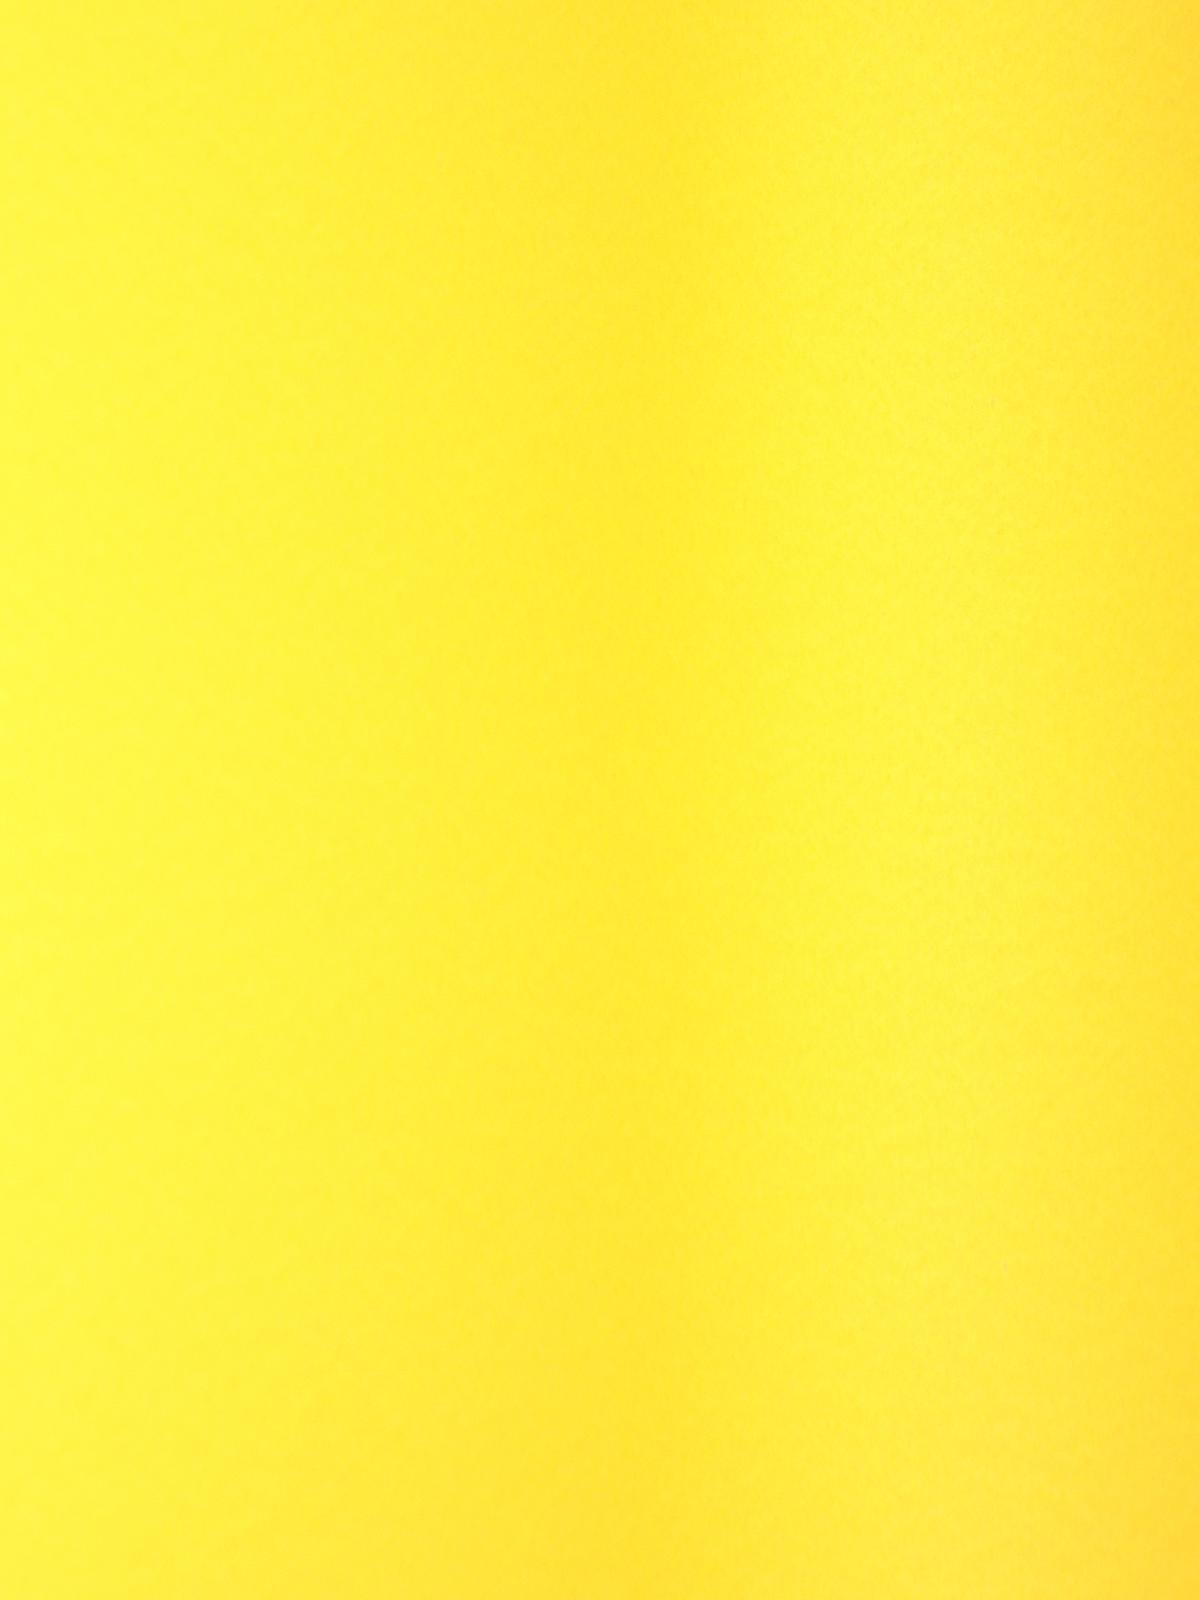 Neon Poster Board Yellow